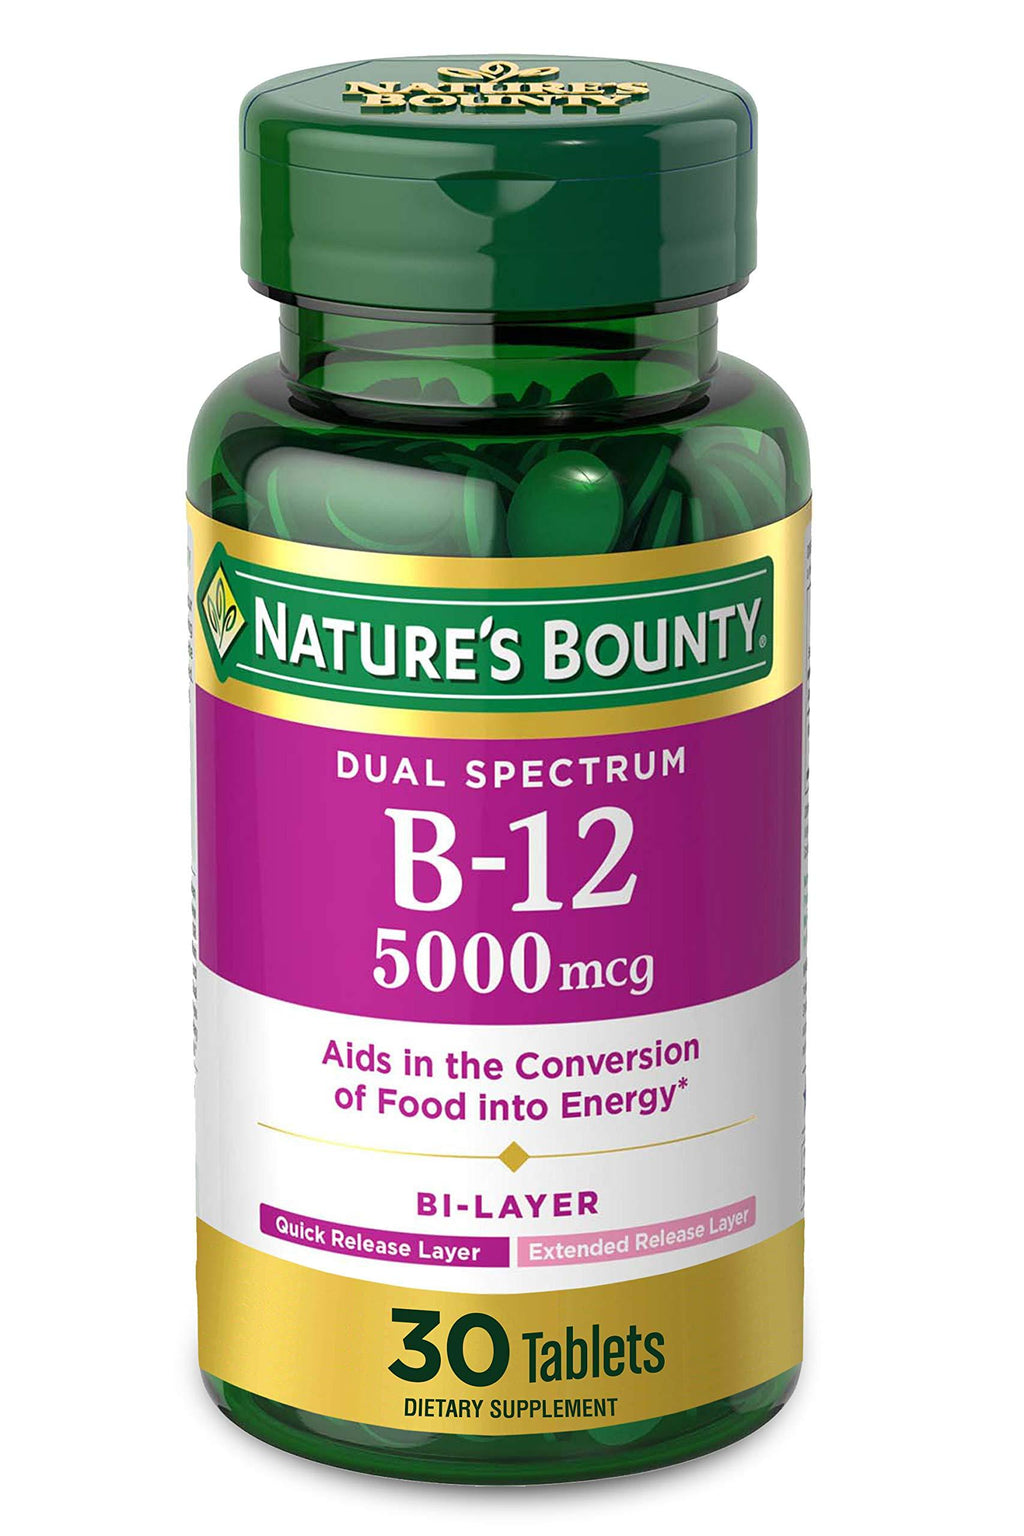 Nature’s Bounty Dual Spectrum Vitamin B-12 Bi-Layer Supplement: Half Quick Release and Half Extended Release, Supports Metabolism and Nervous System Health, 5000mcg, 30 Tablets - BeesActive Australia